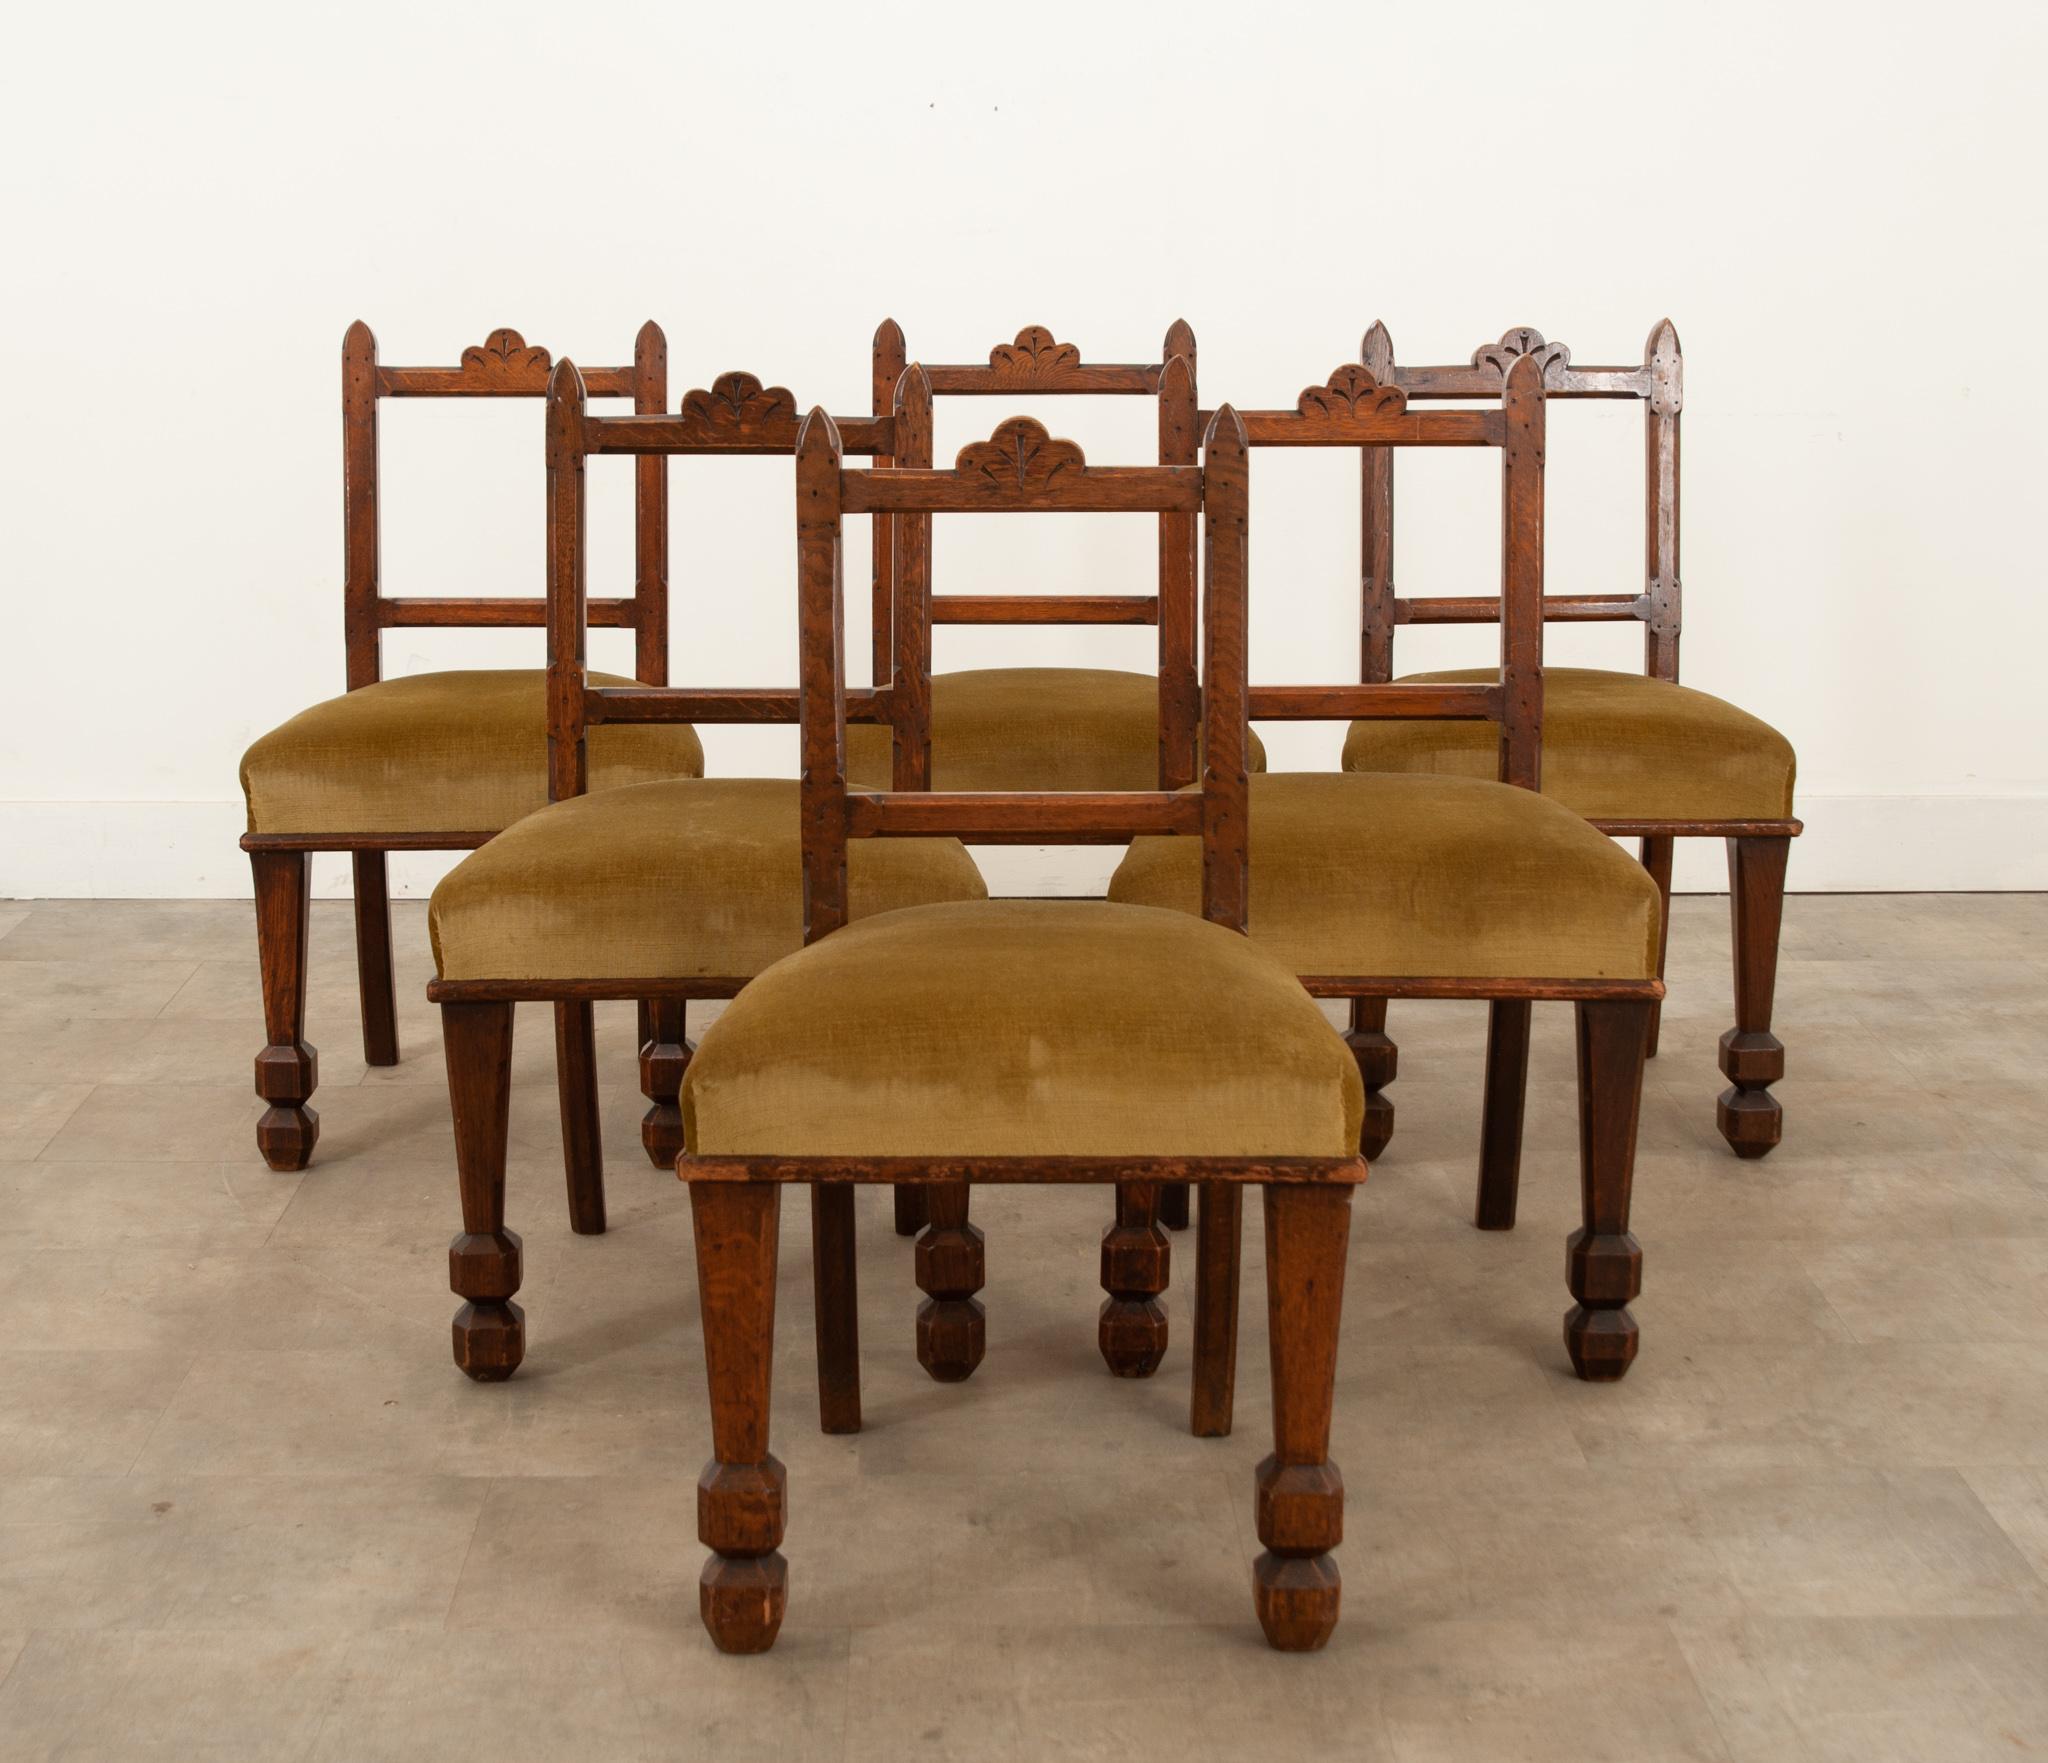 Set of six Edwardian period carved oak dining chairs dating to circa 1890 with green velvet upholstered seats. They have stable, oak frames which have a beautiful time worn patina and feature nicely carved Gothic Revival style backs, and are raised